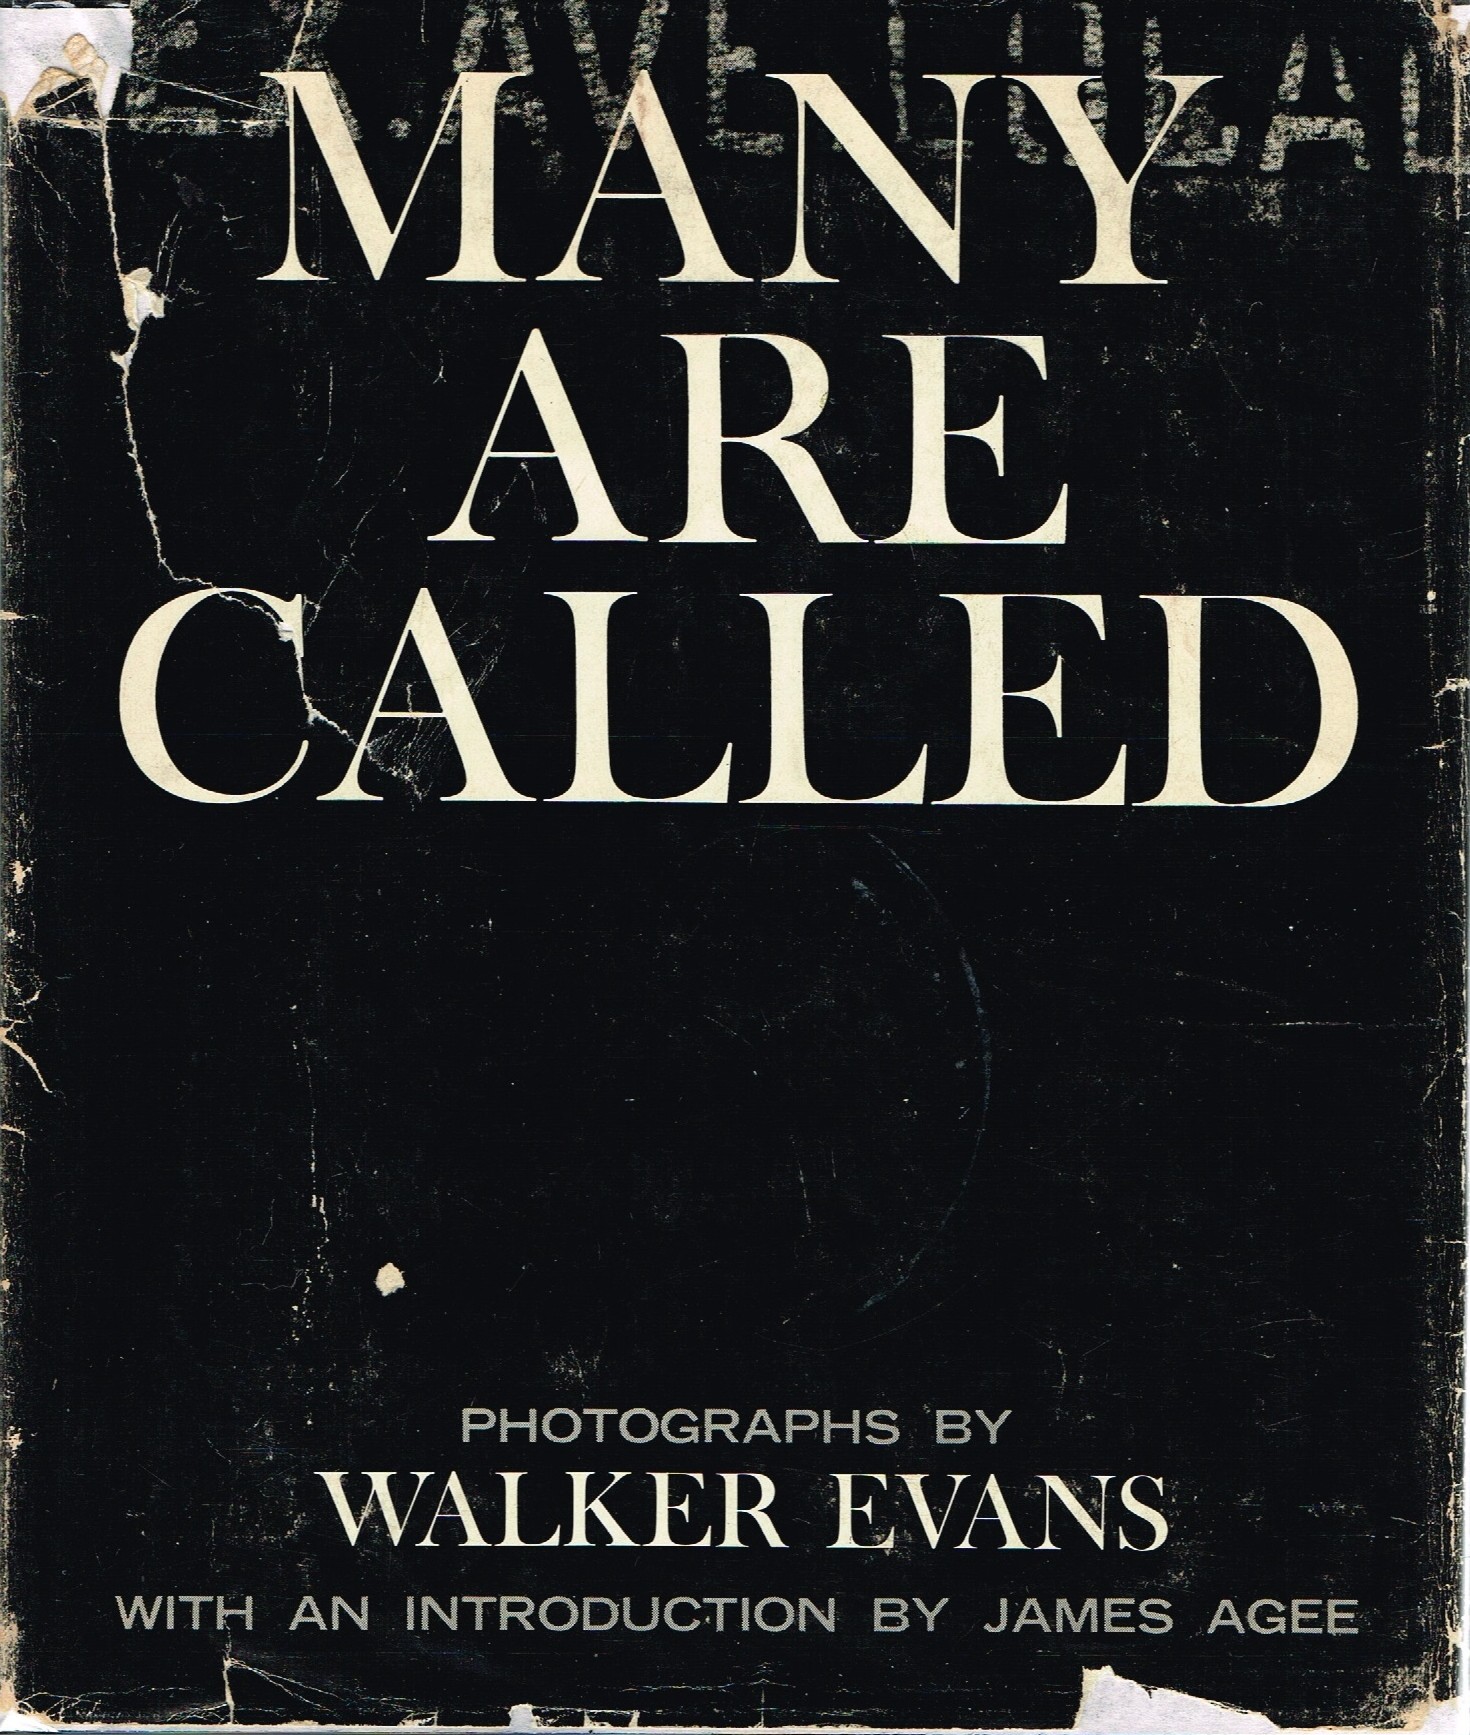 (EVANS, WALKER). Evans, Walker. Introduction by James Agee - MANY ARE CALLED: PHOTOGRAPHS BY WALKER EVANS